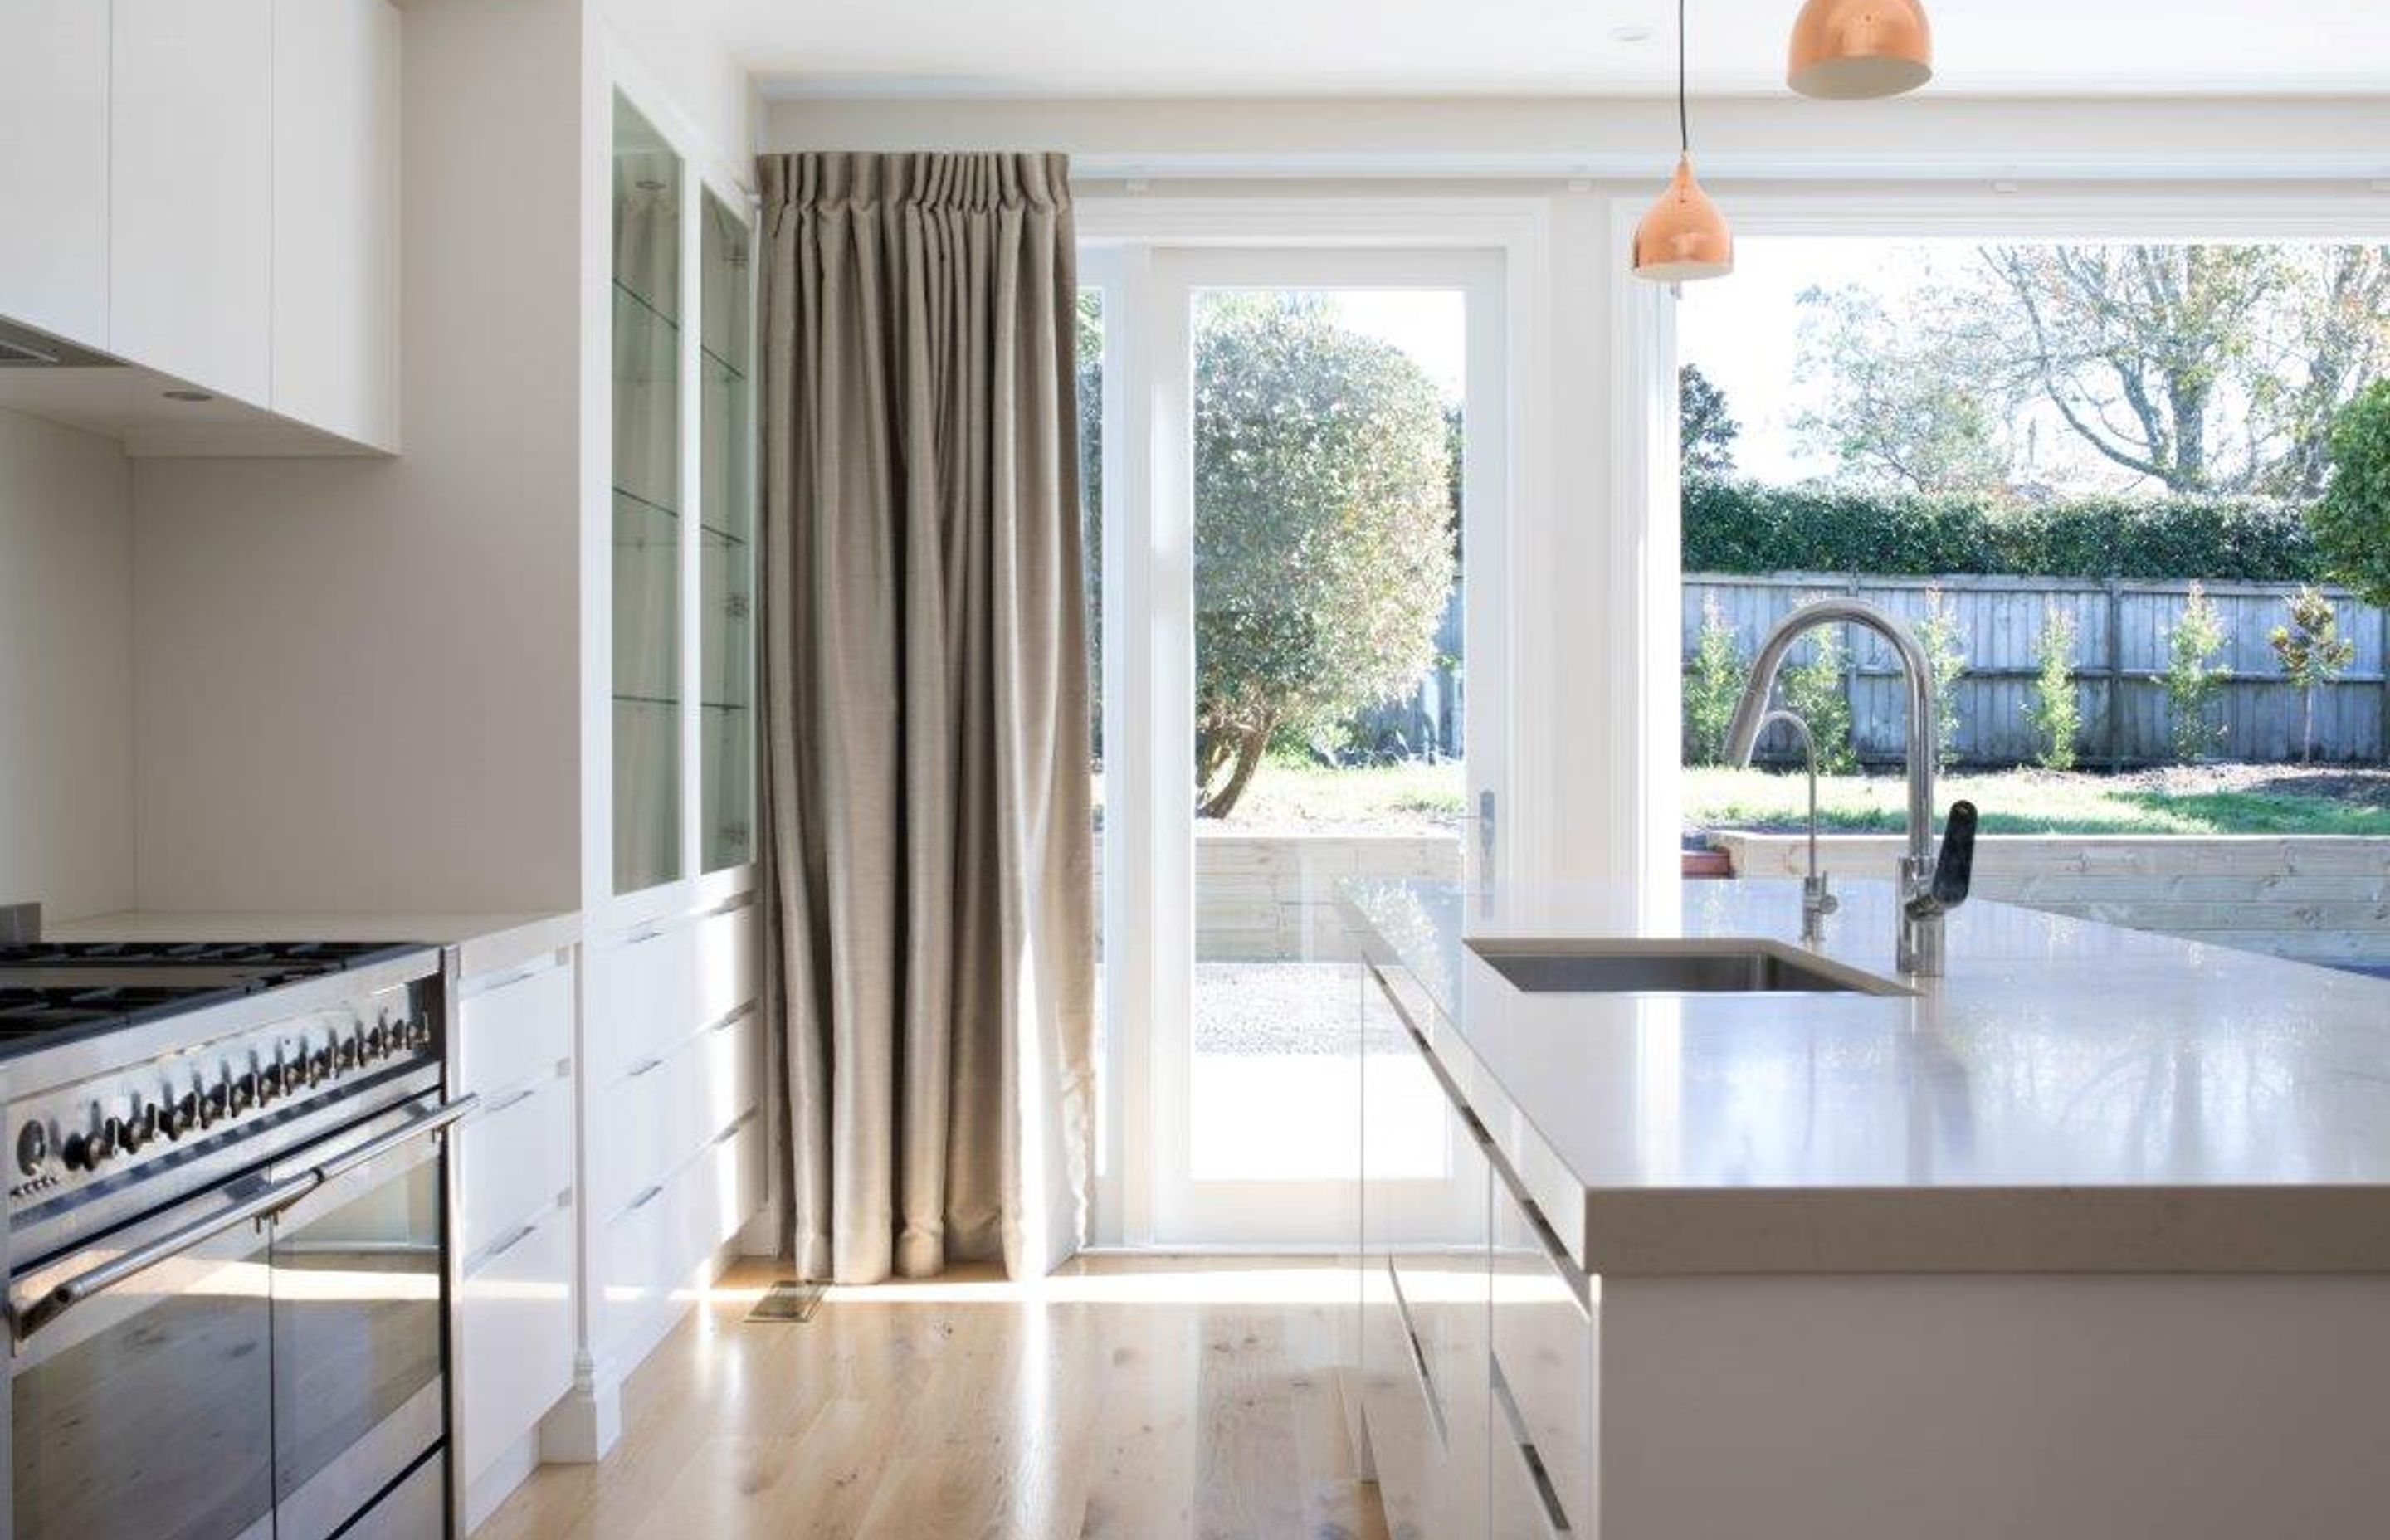 The new kitchen looks out into an open-plan living space, which is ideal for entertaining.